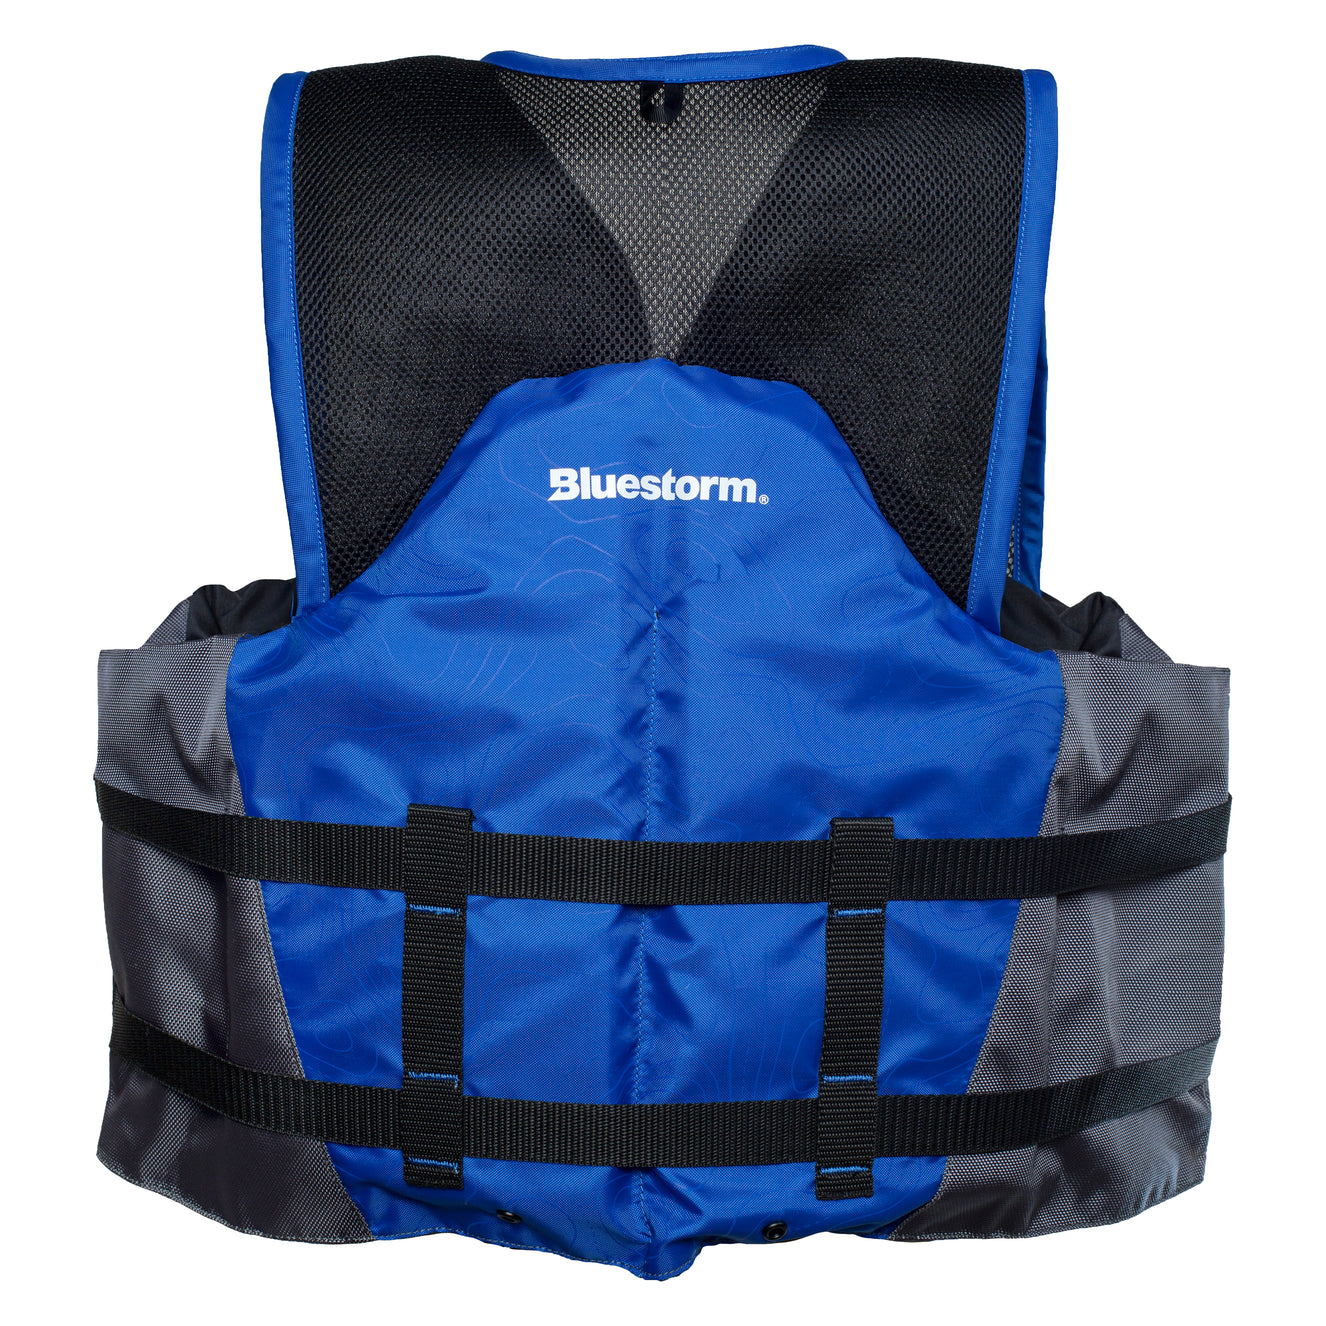 BLUESTORM Sportsman Life Jacket PFD for Adults - US Coast Guard (USCG) Approved Type 3 Life Vest Preserver for Fishing, Kayaking, & More (Mutliple Colors, S-3XL)